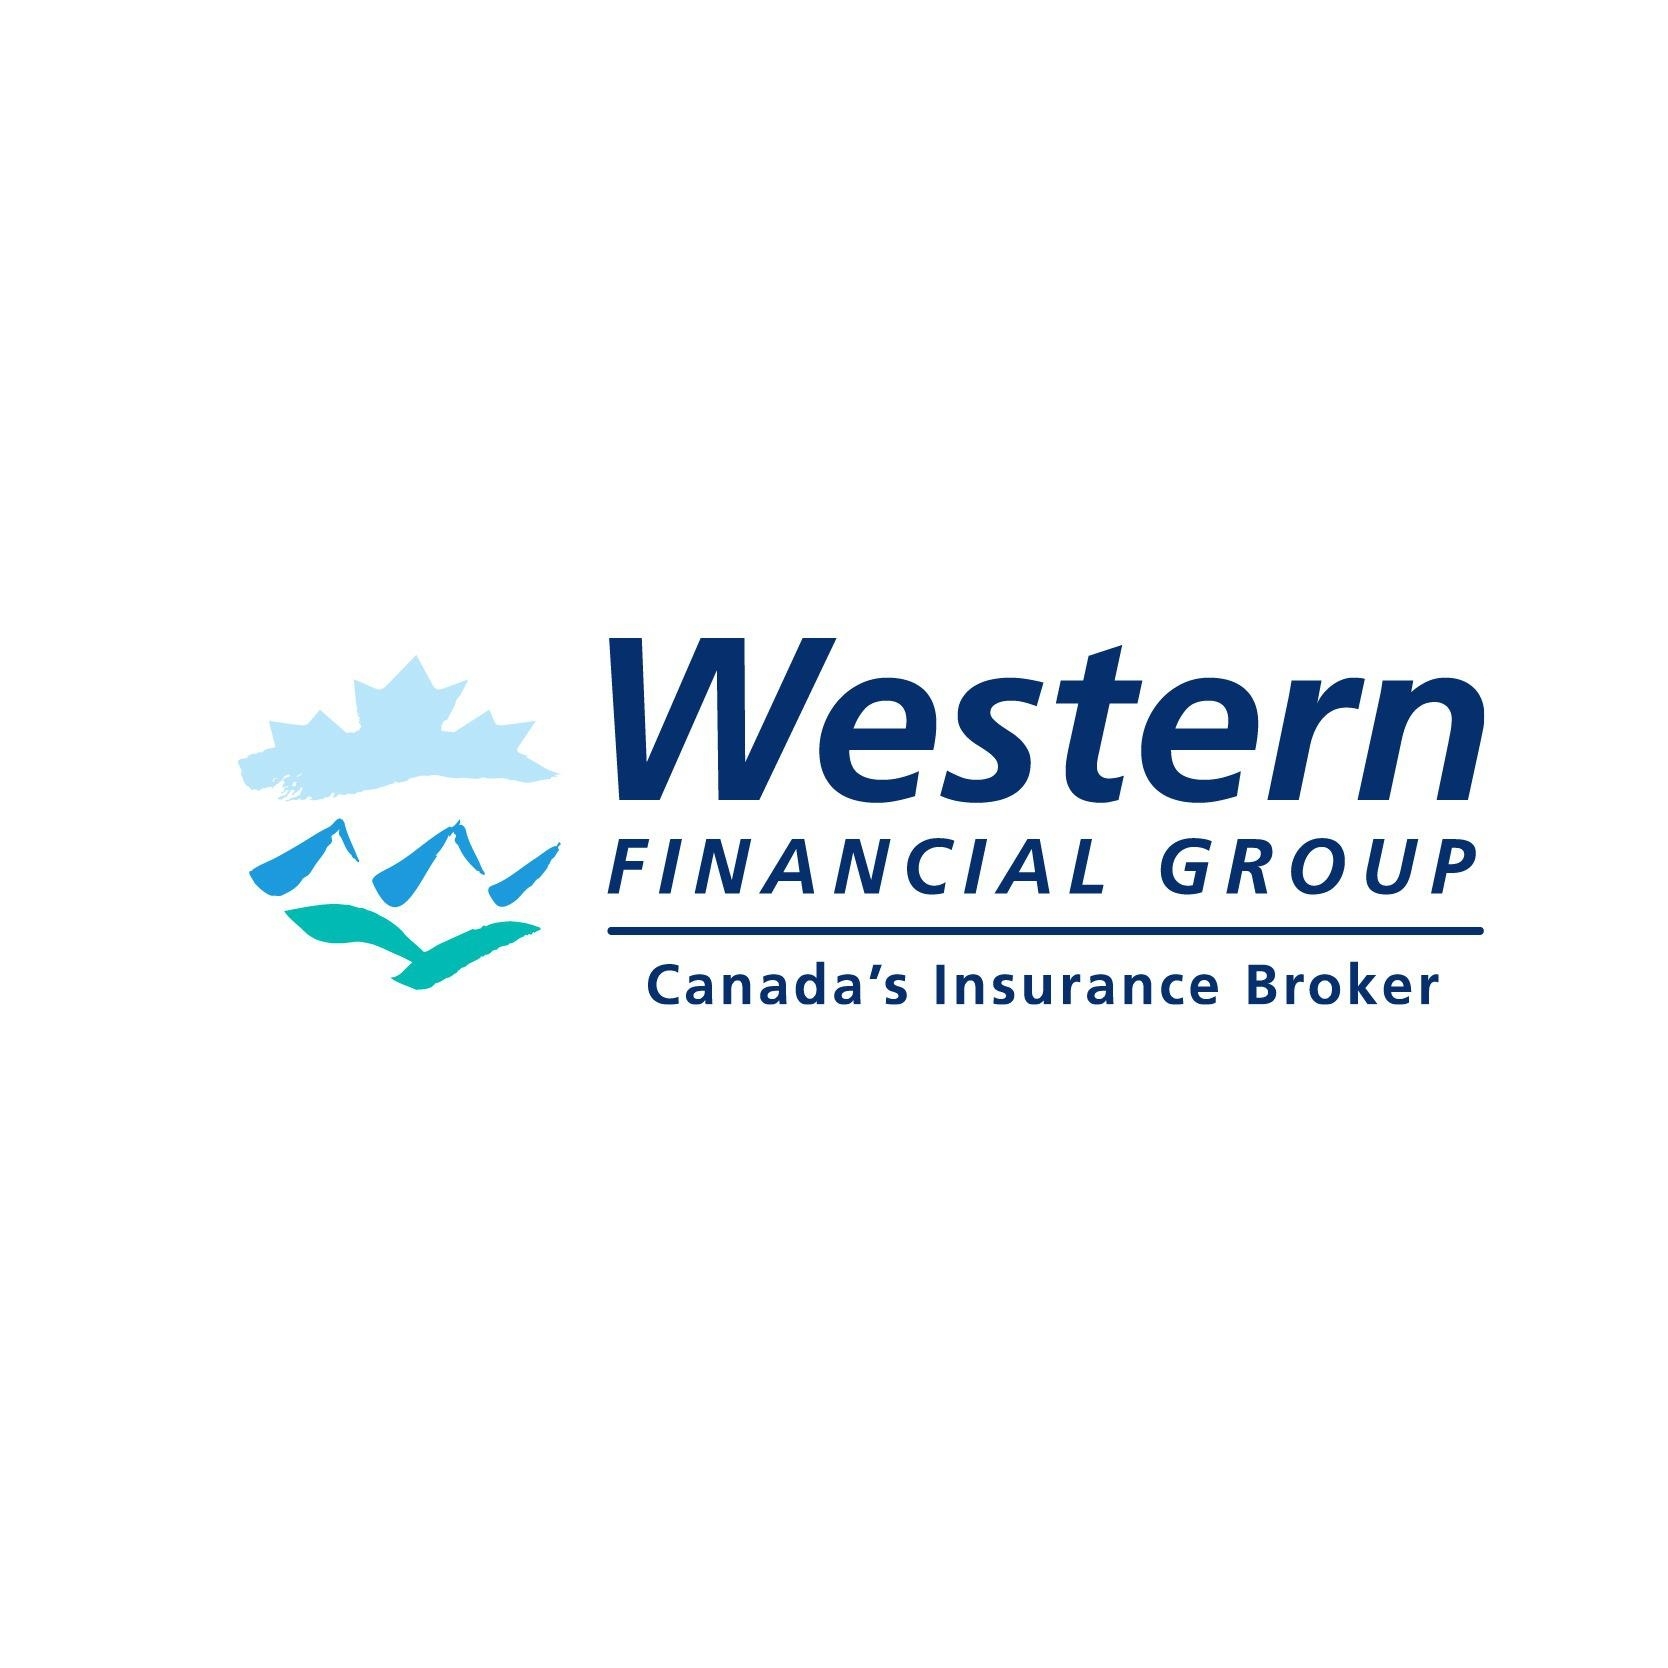 Western Financial Group (formerly known as Orr & Associates Insurance Brokers) - Assurance